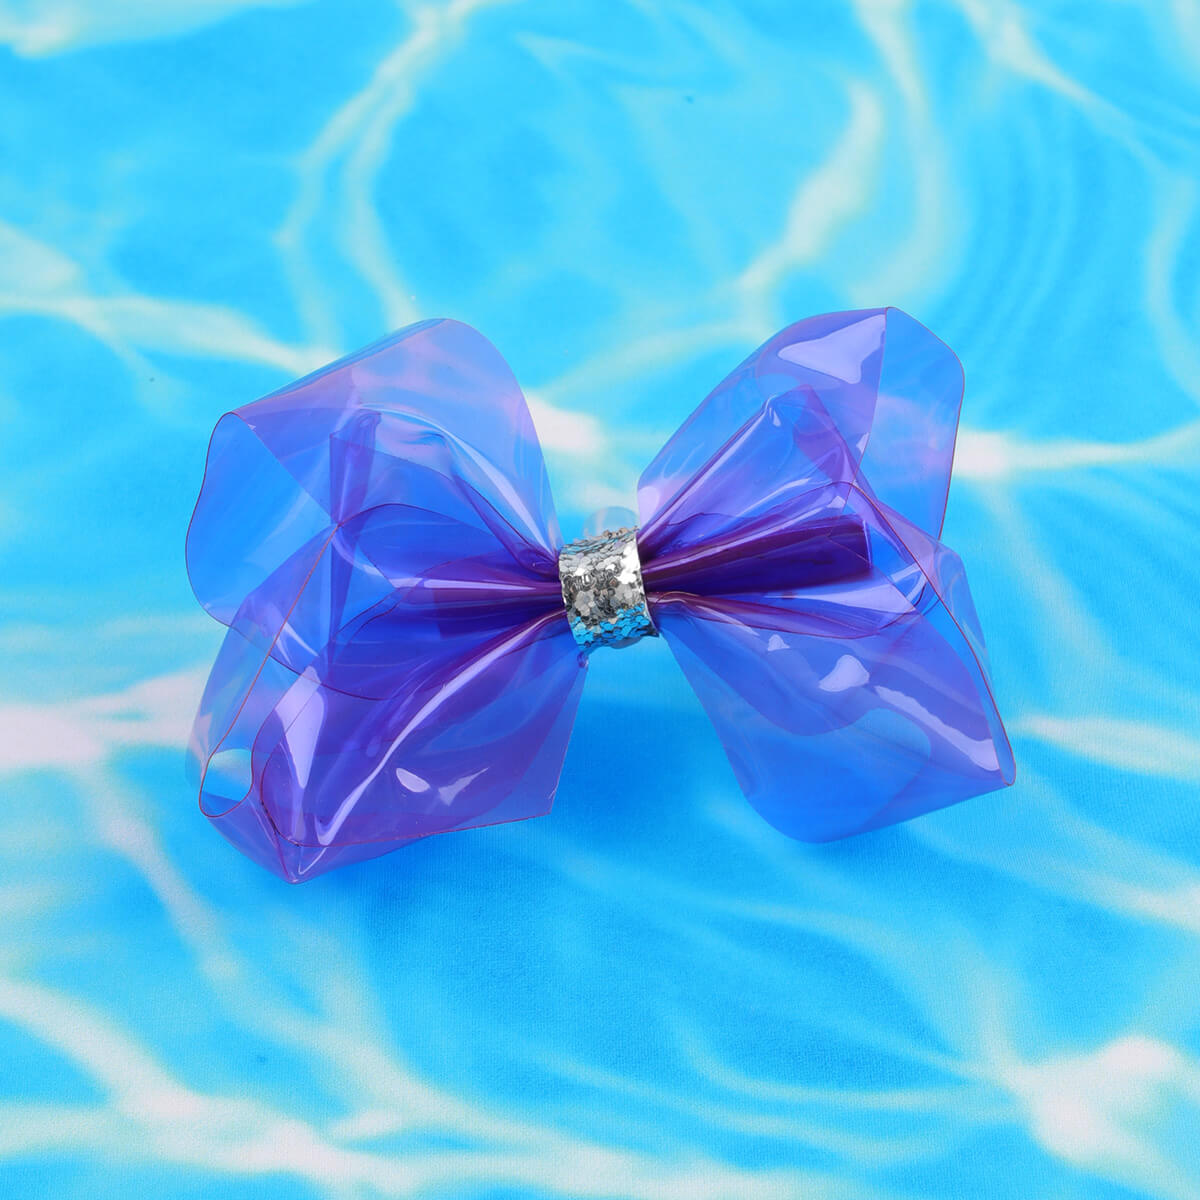 Swim Party Glitter Jelly Hair Bows